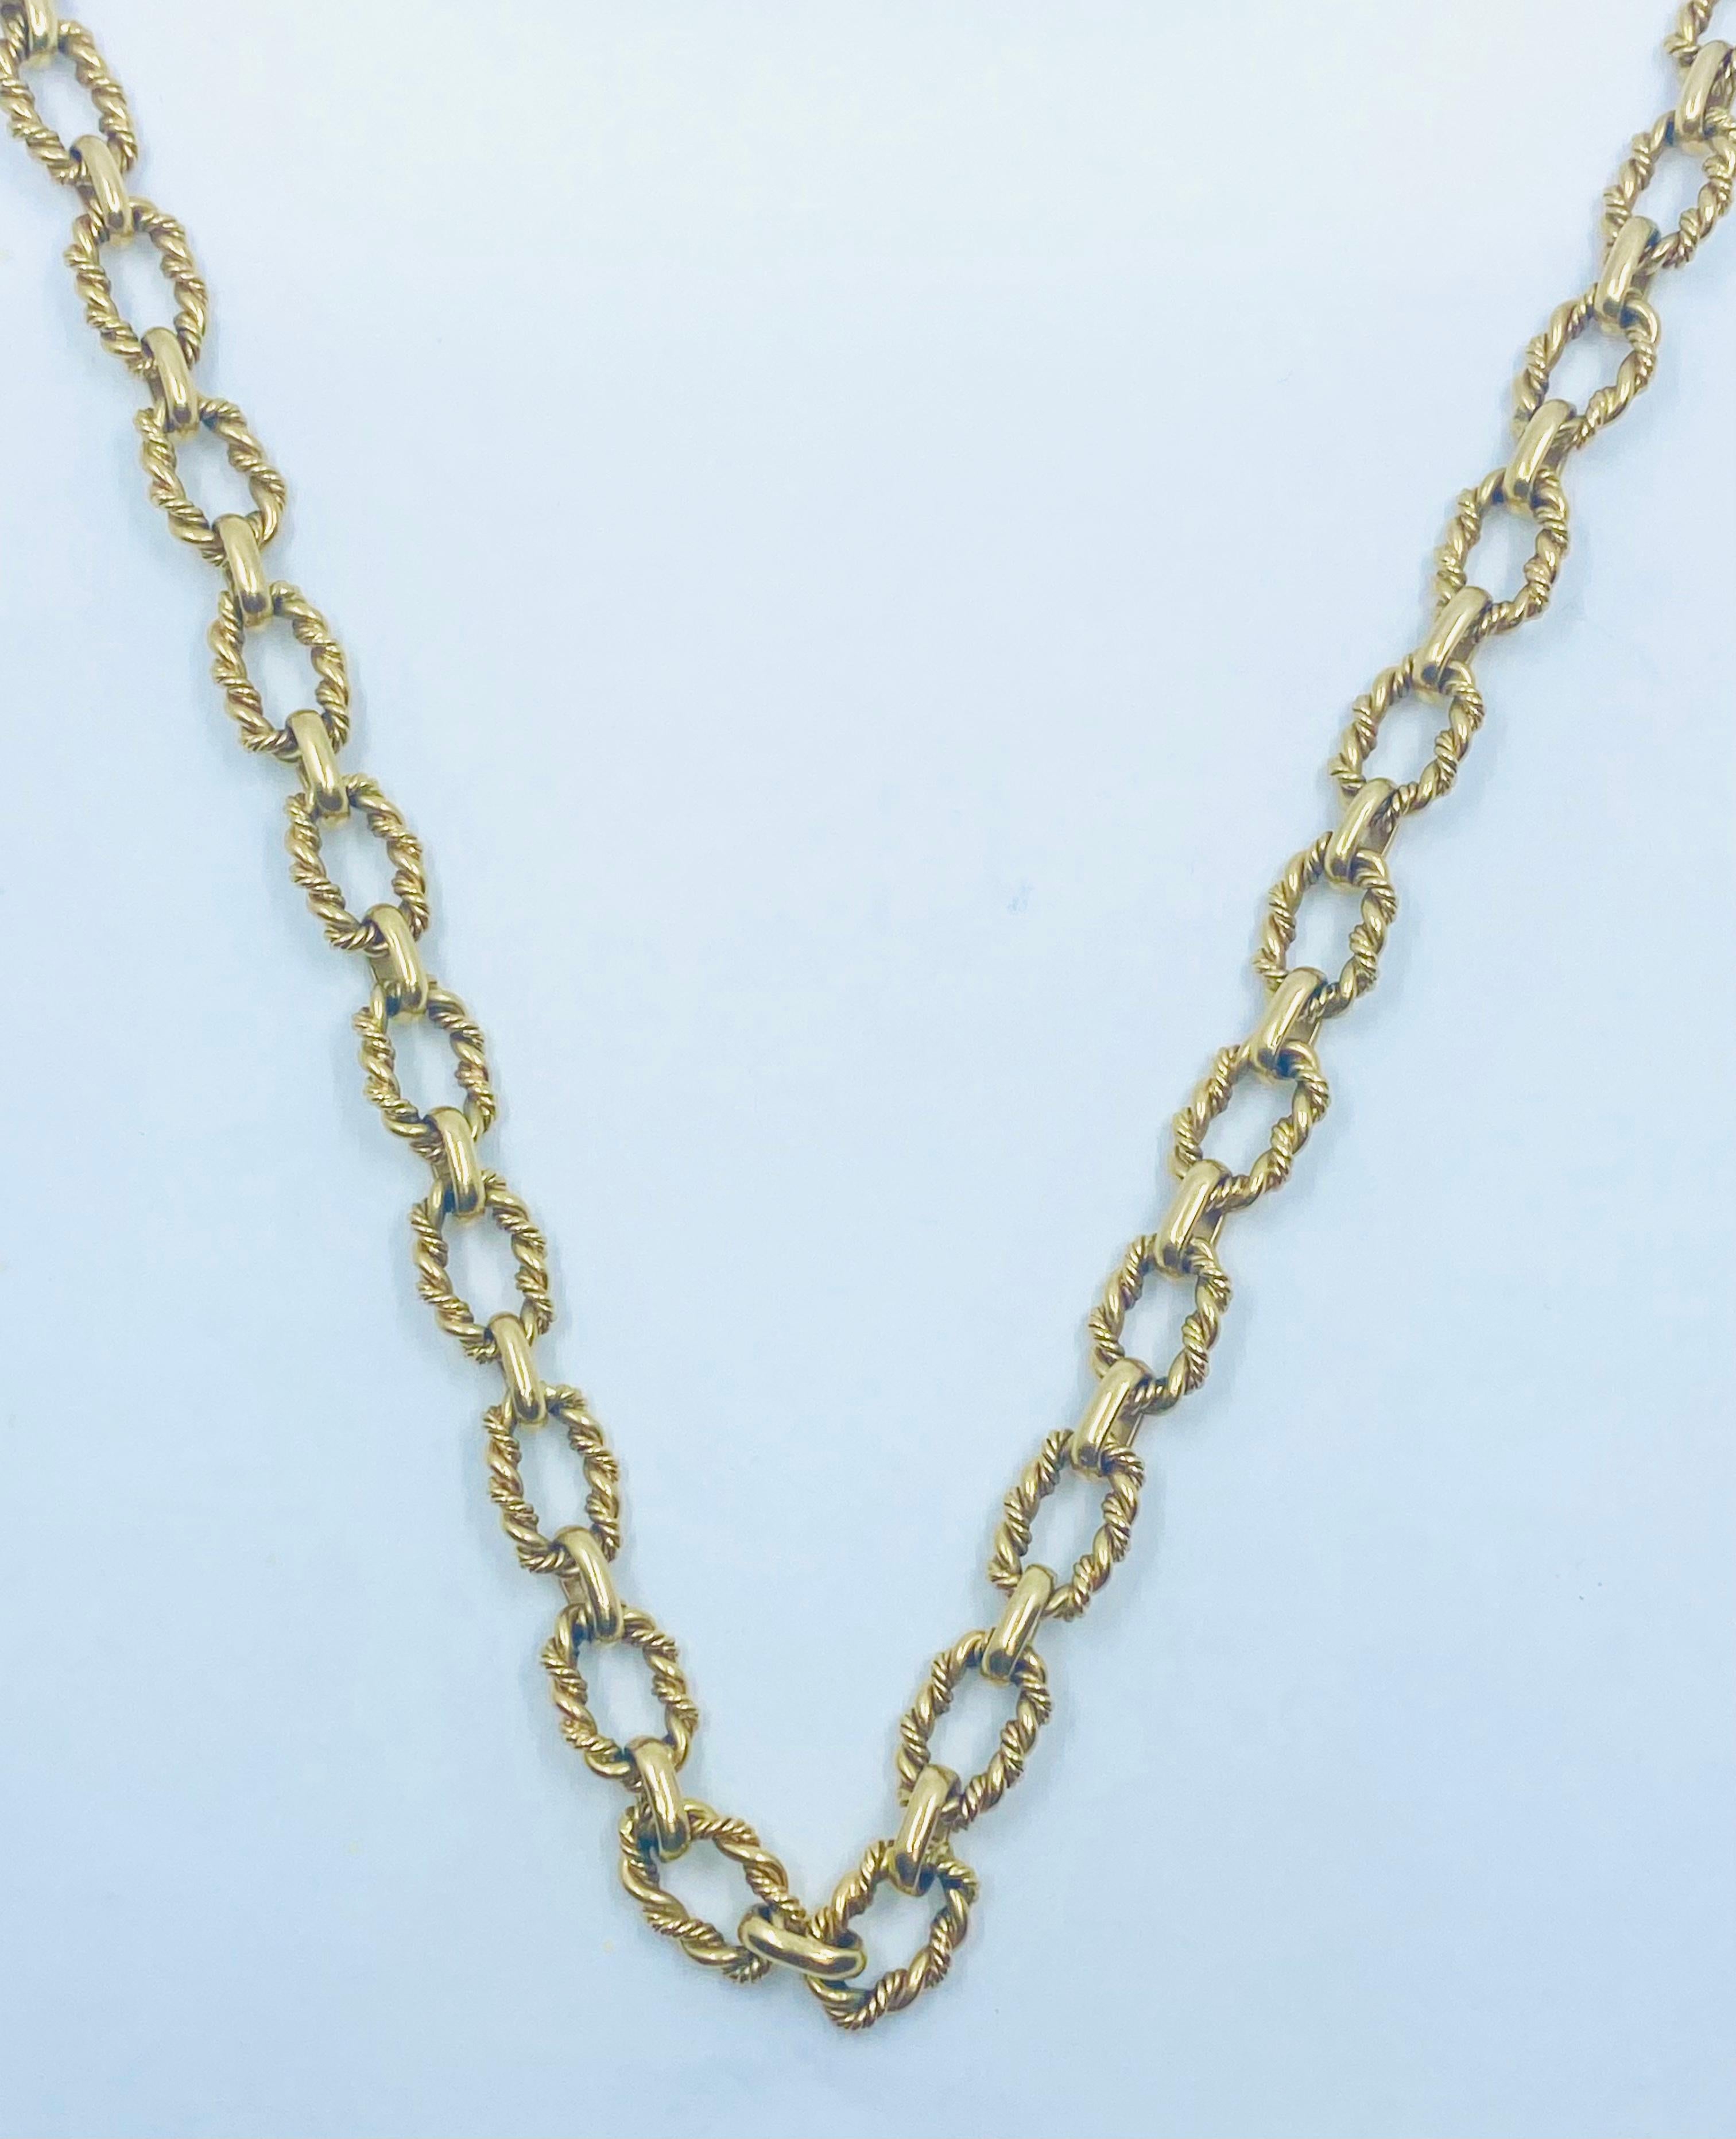 Tiffany & Co. Vintage 14k Link Necklace In Excellent Condition For Sale In Beverly Hills, CA